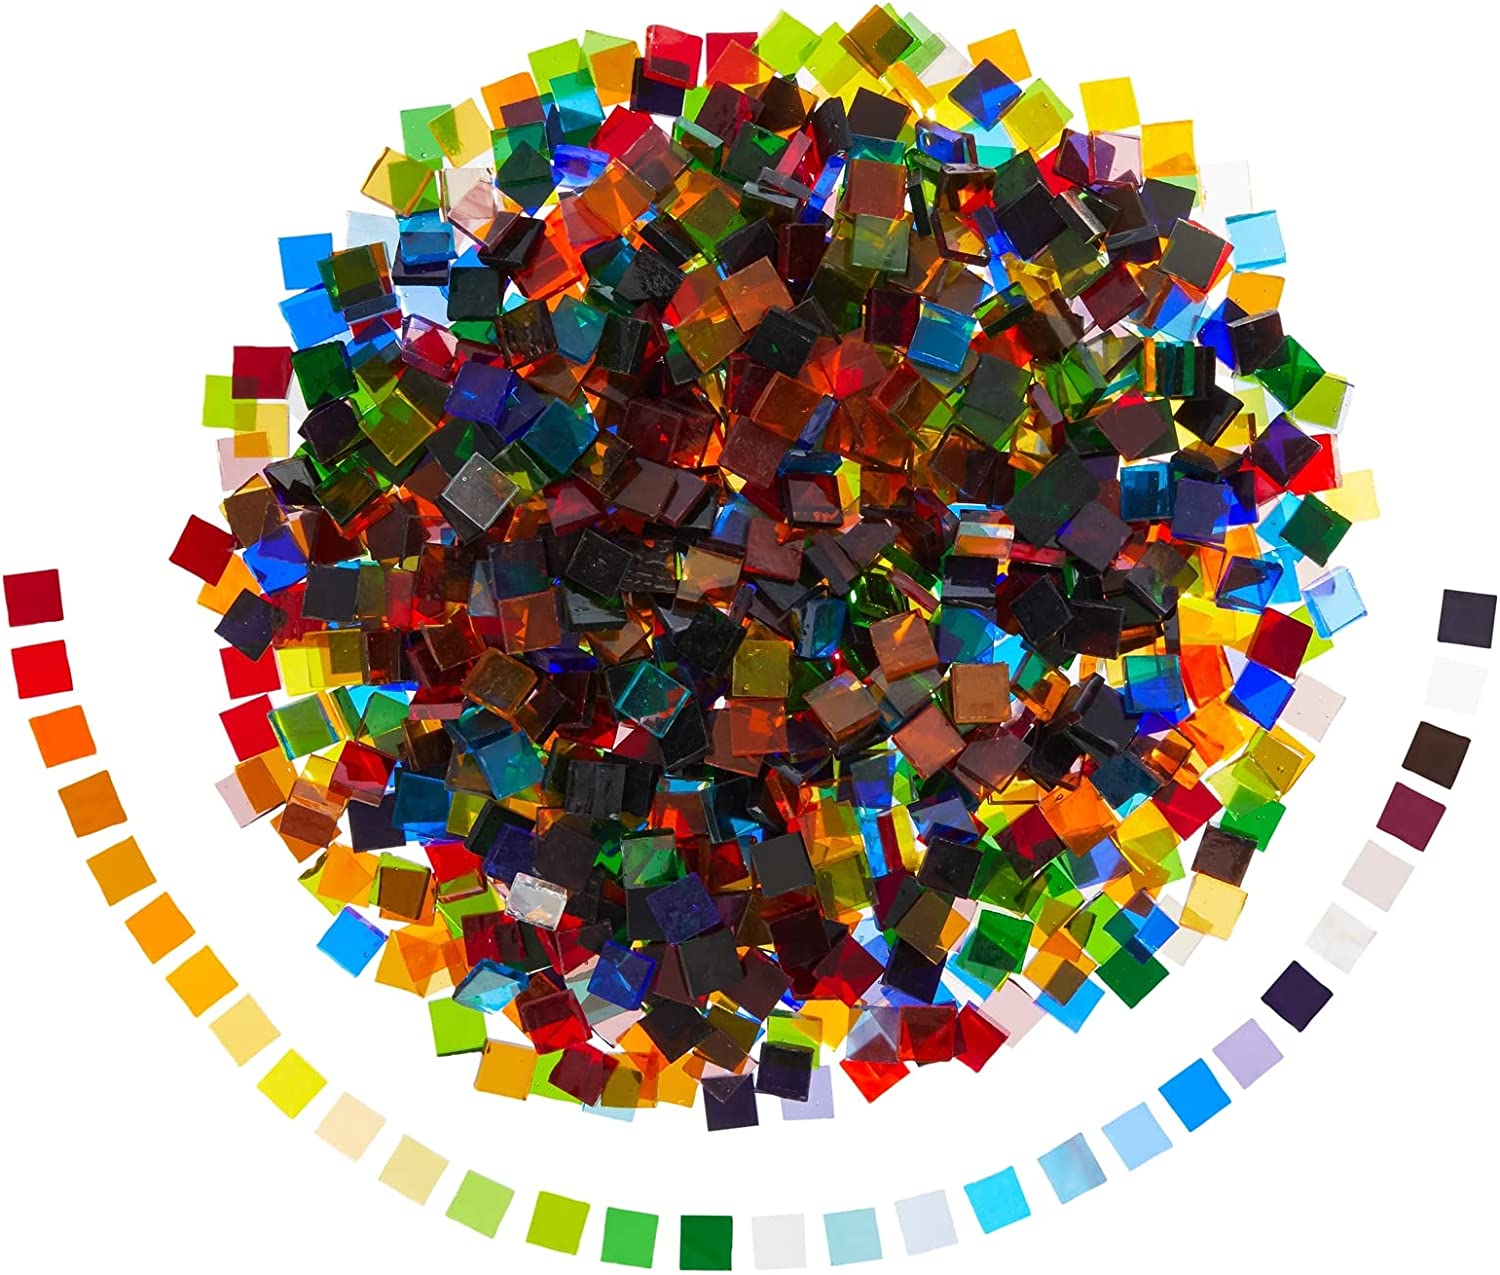 Aunifun Mixed Color Mosaic Tiles Mosaic Glass Pieces with 1kg/35